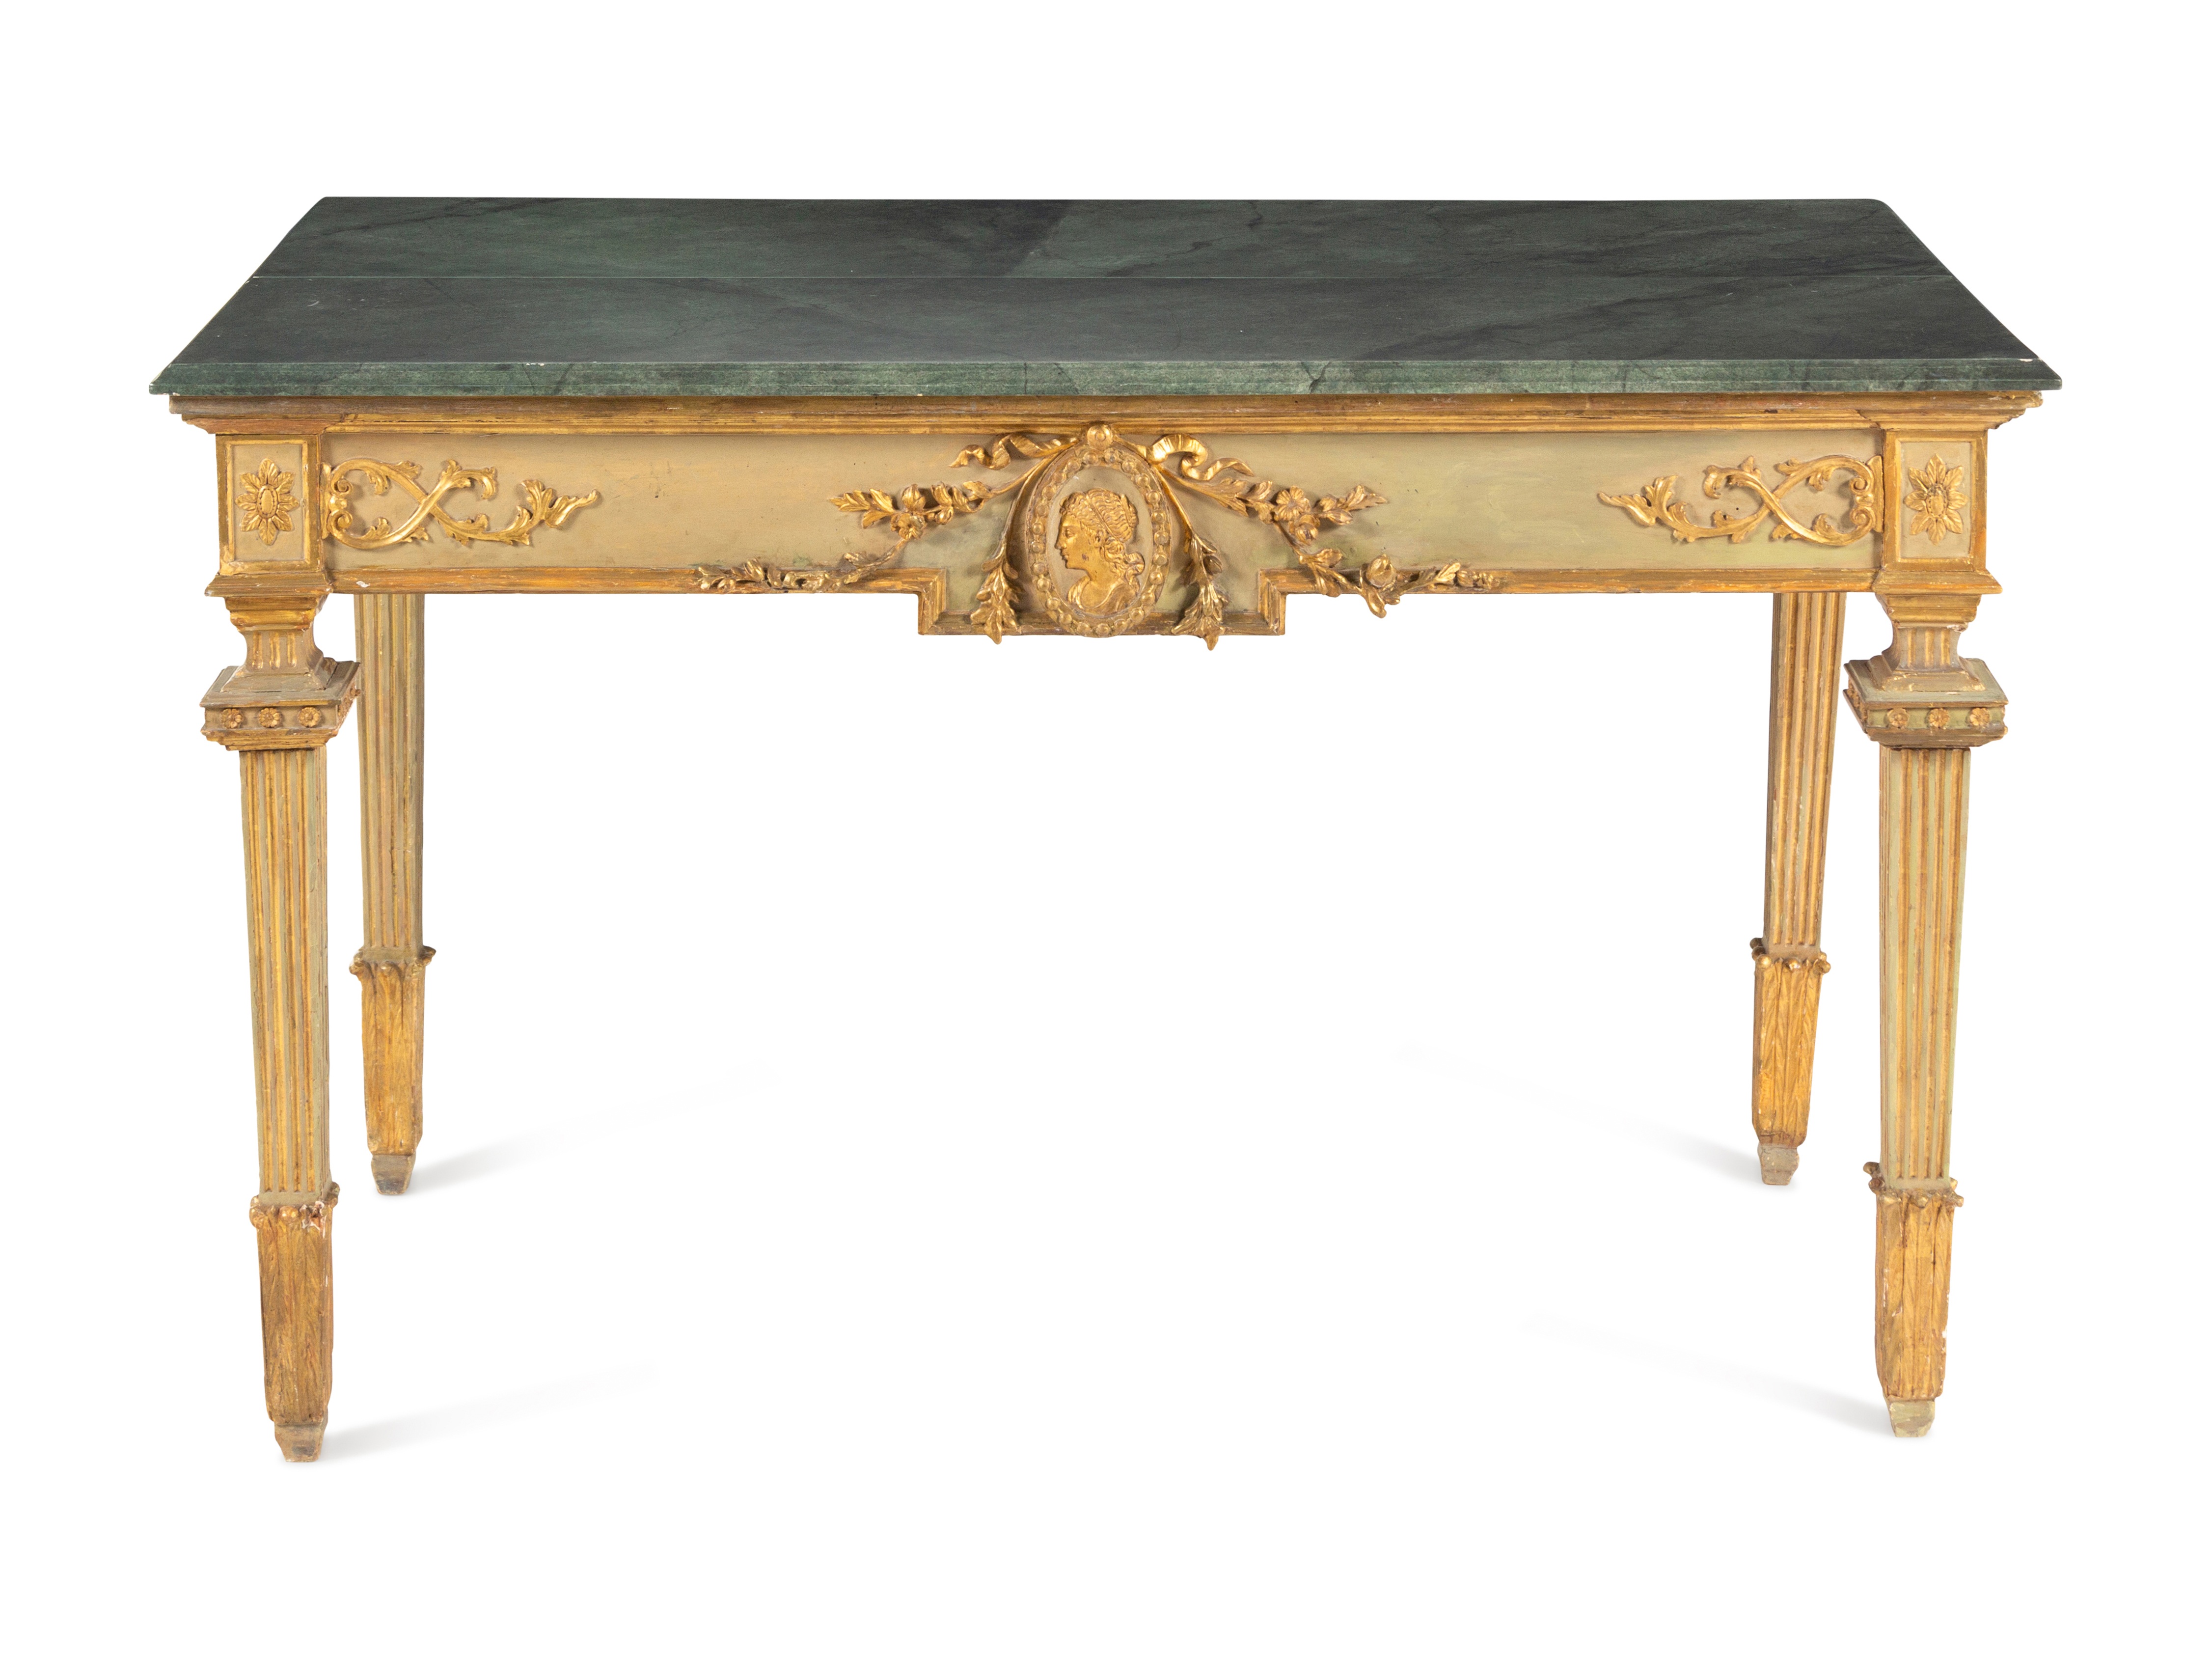 A North Italian Neoclassical Painted and Parcel-Gilt Console Table